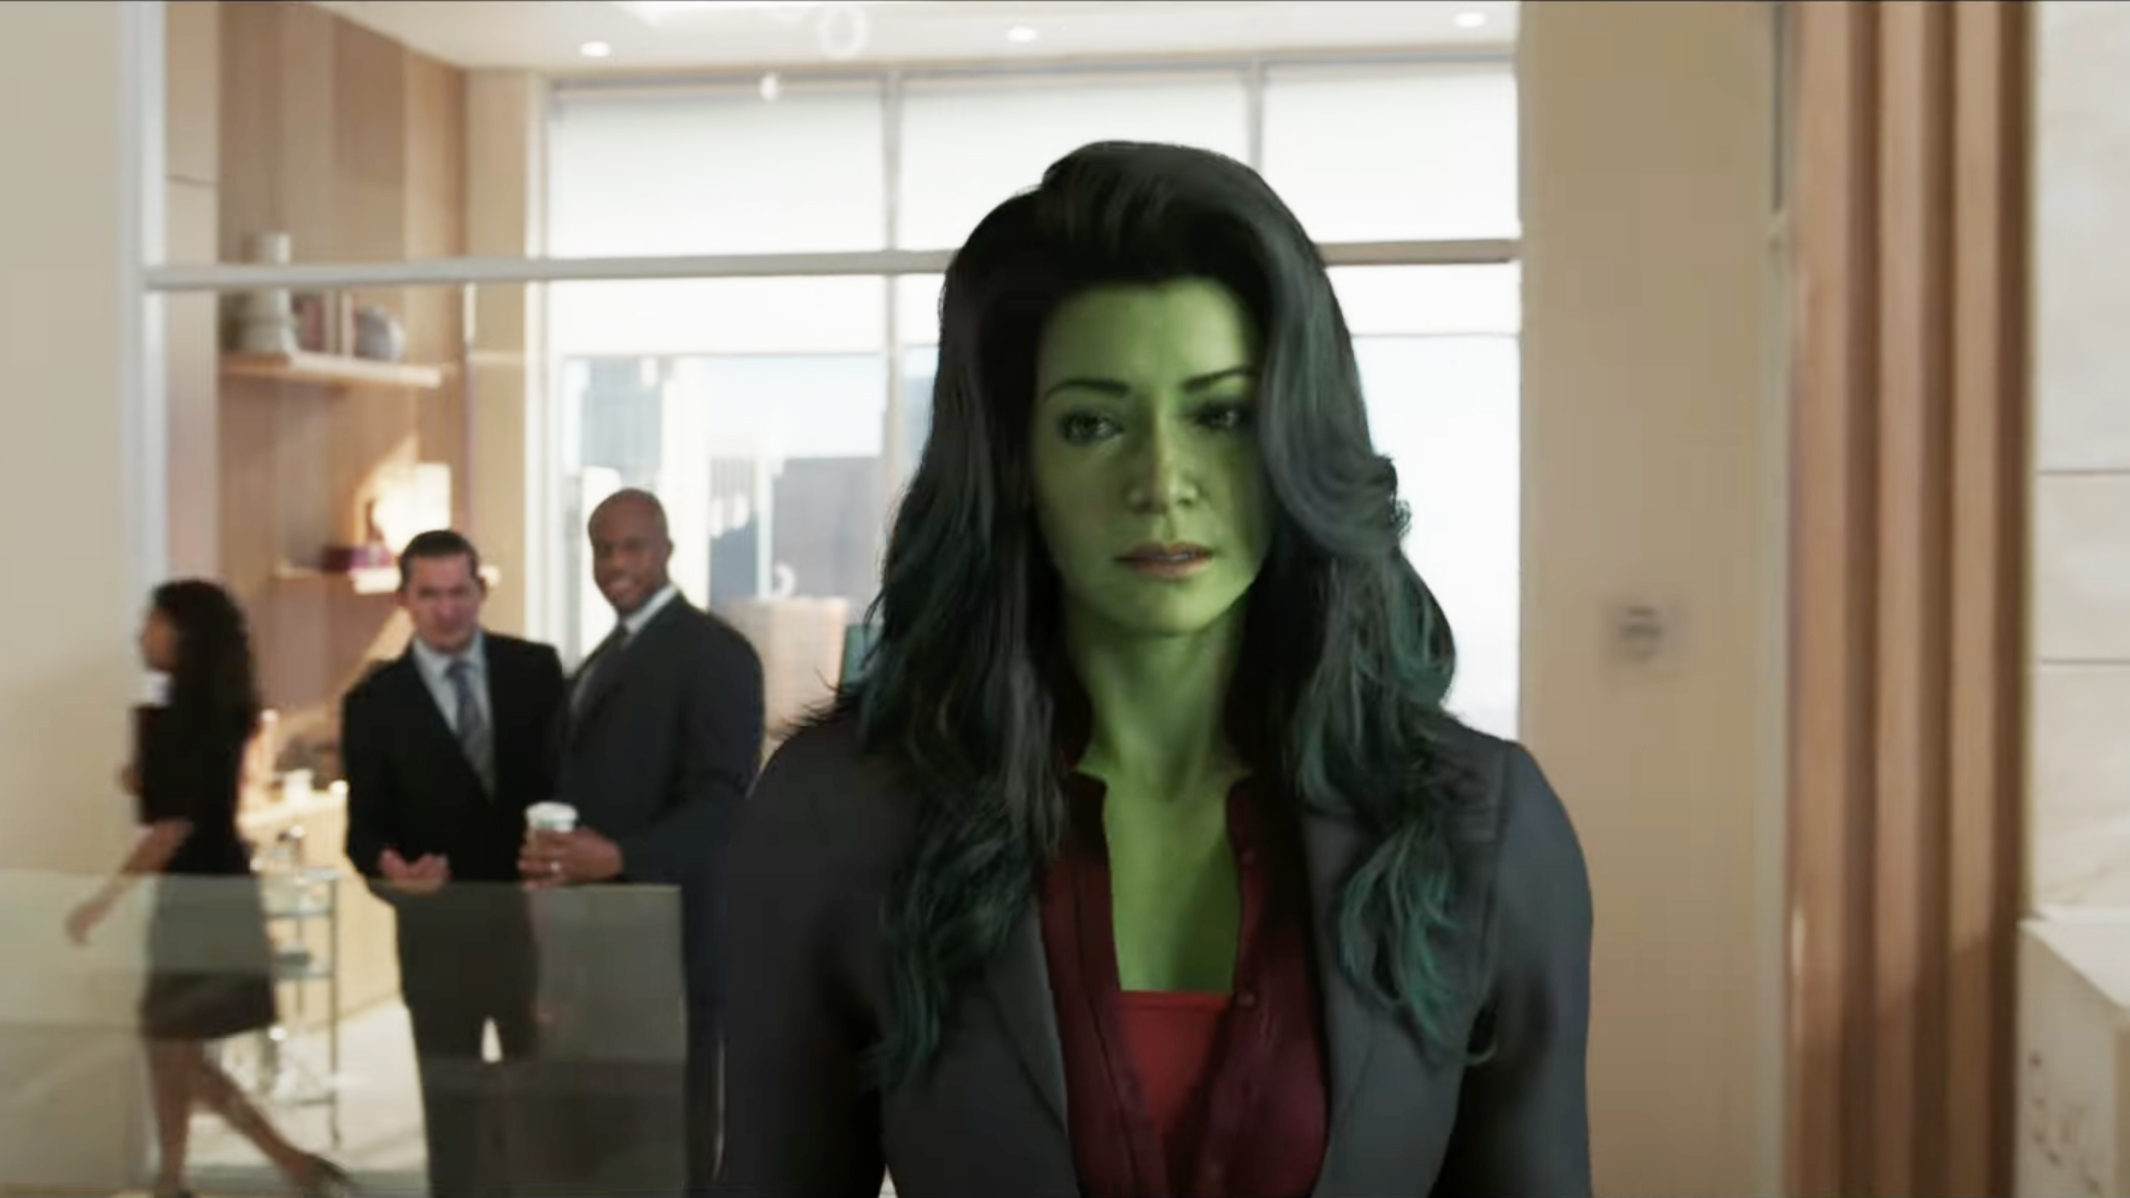 She-Hulk TV Clip  She-Hulk and Daredevil face off in this week's